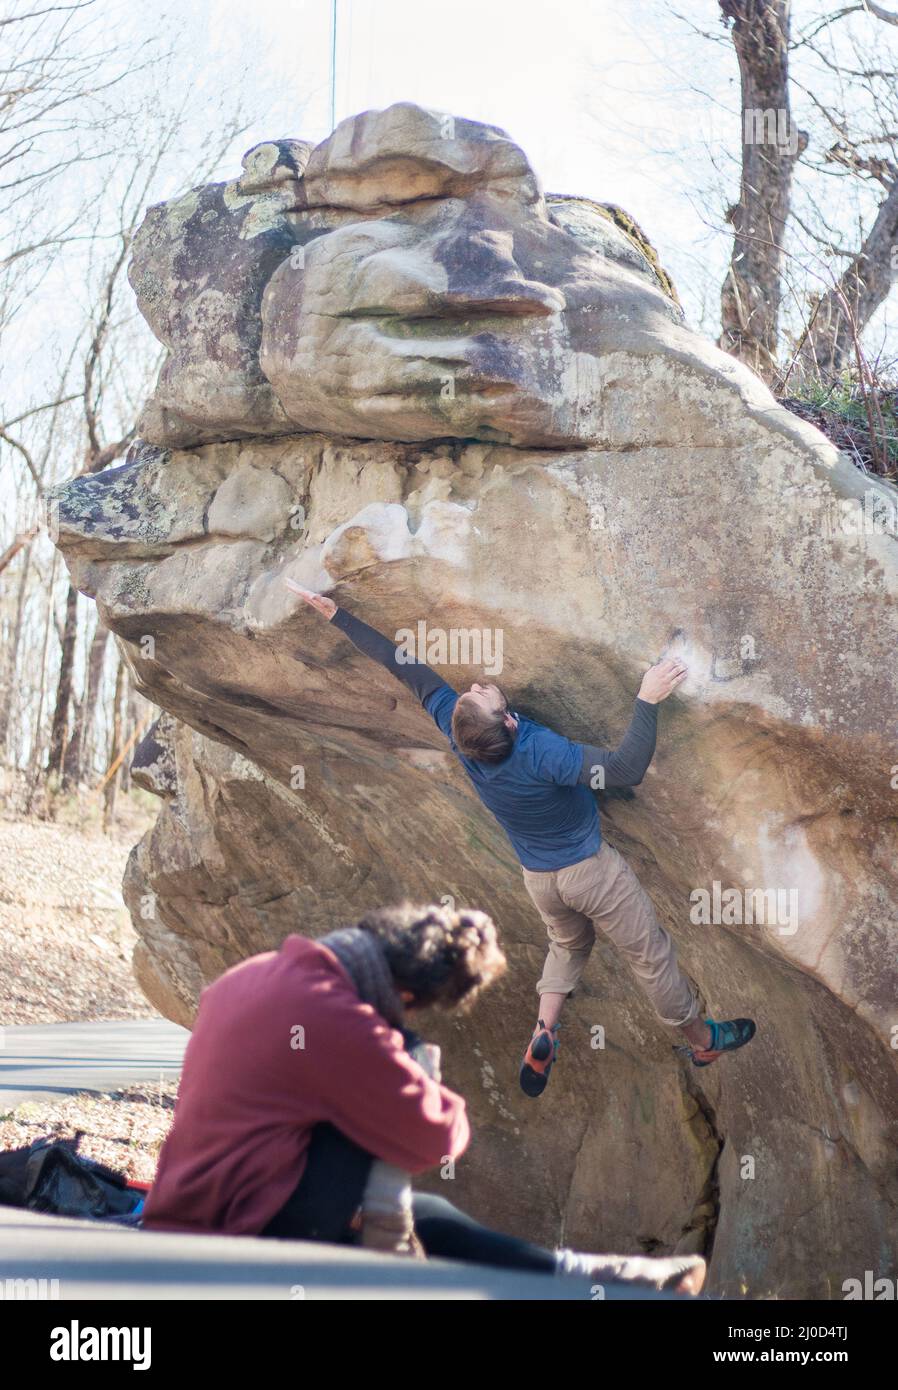 Strong male rock climber jumps to complete sandstone boulder, wife filming (series) Stock Photo